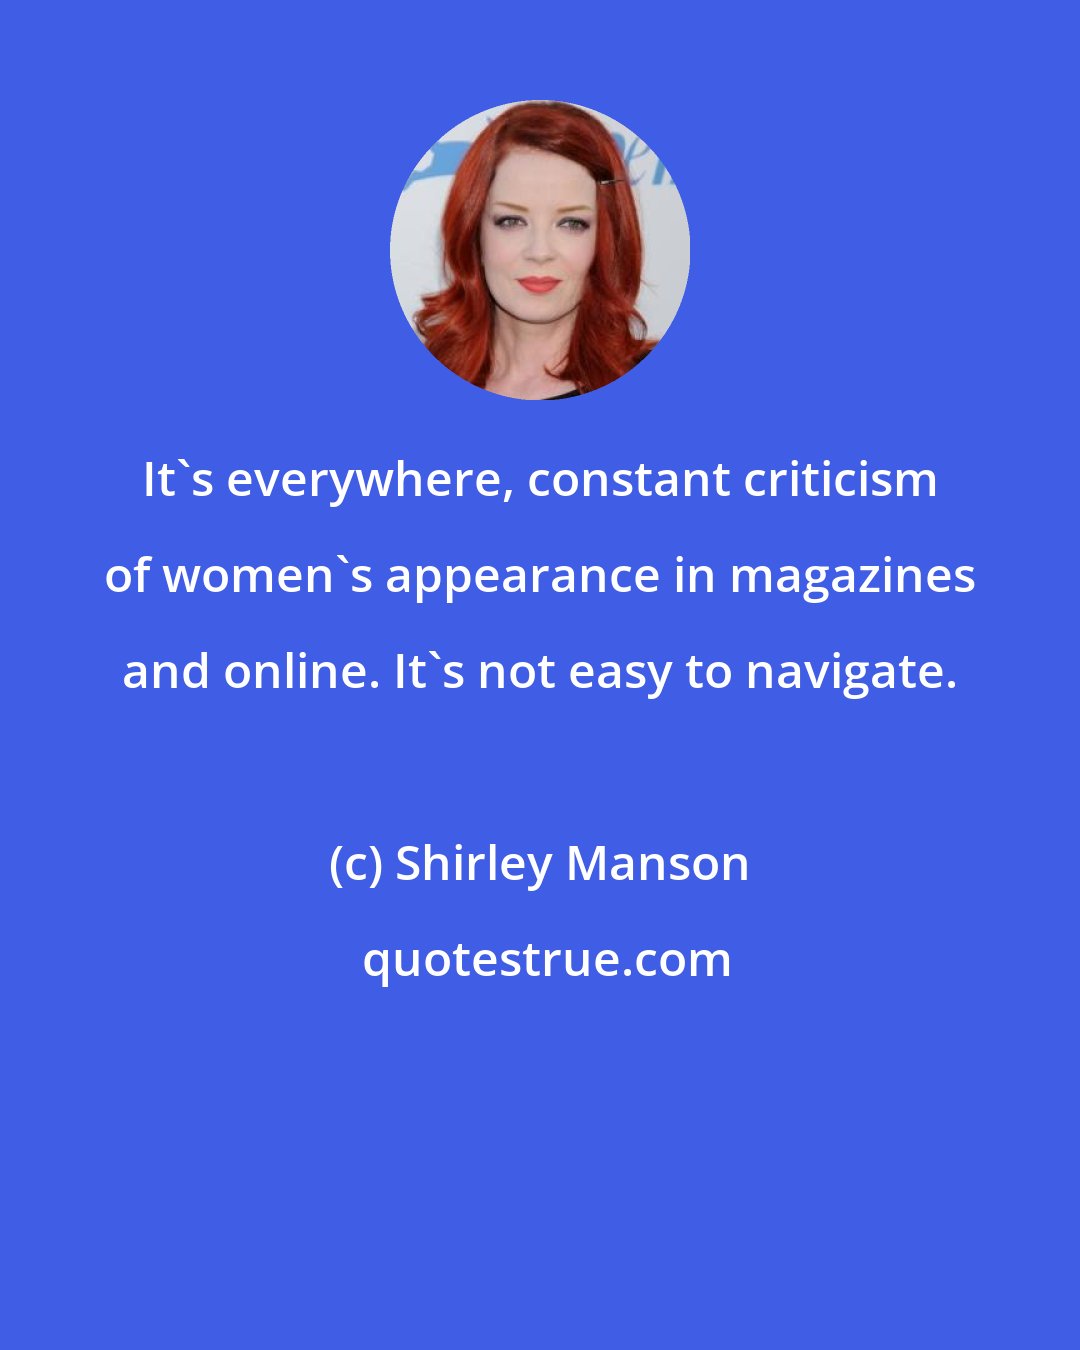 Shirley Manson: It's everywhere, constant criticism of women's appearance in magazines and online. It's not easy to navigate.